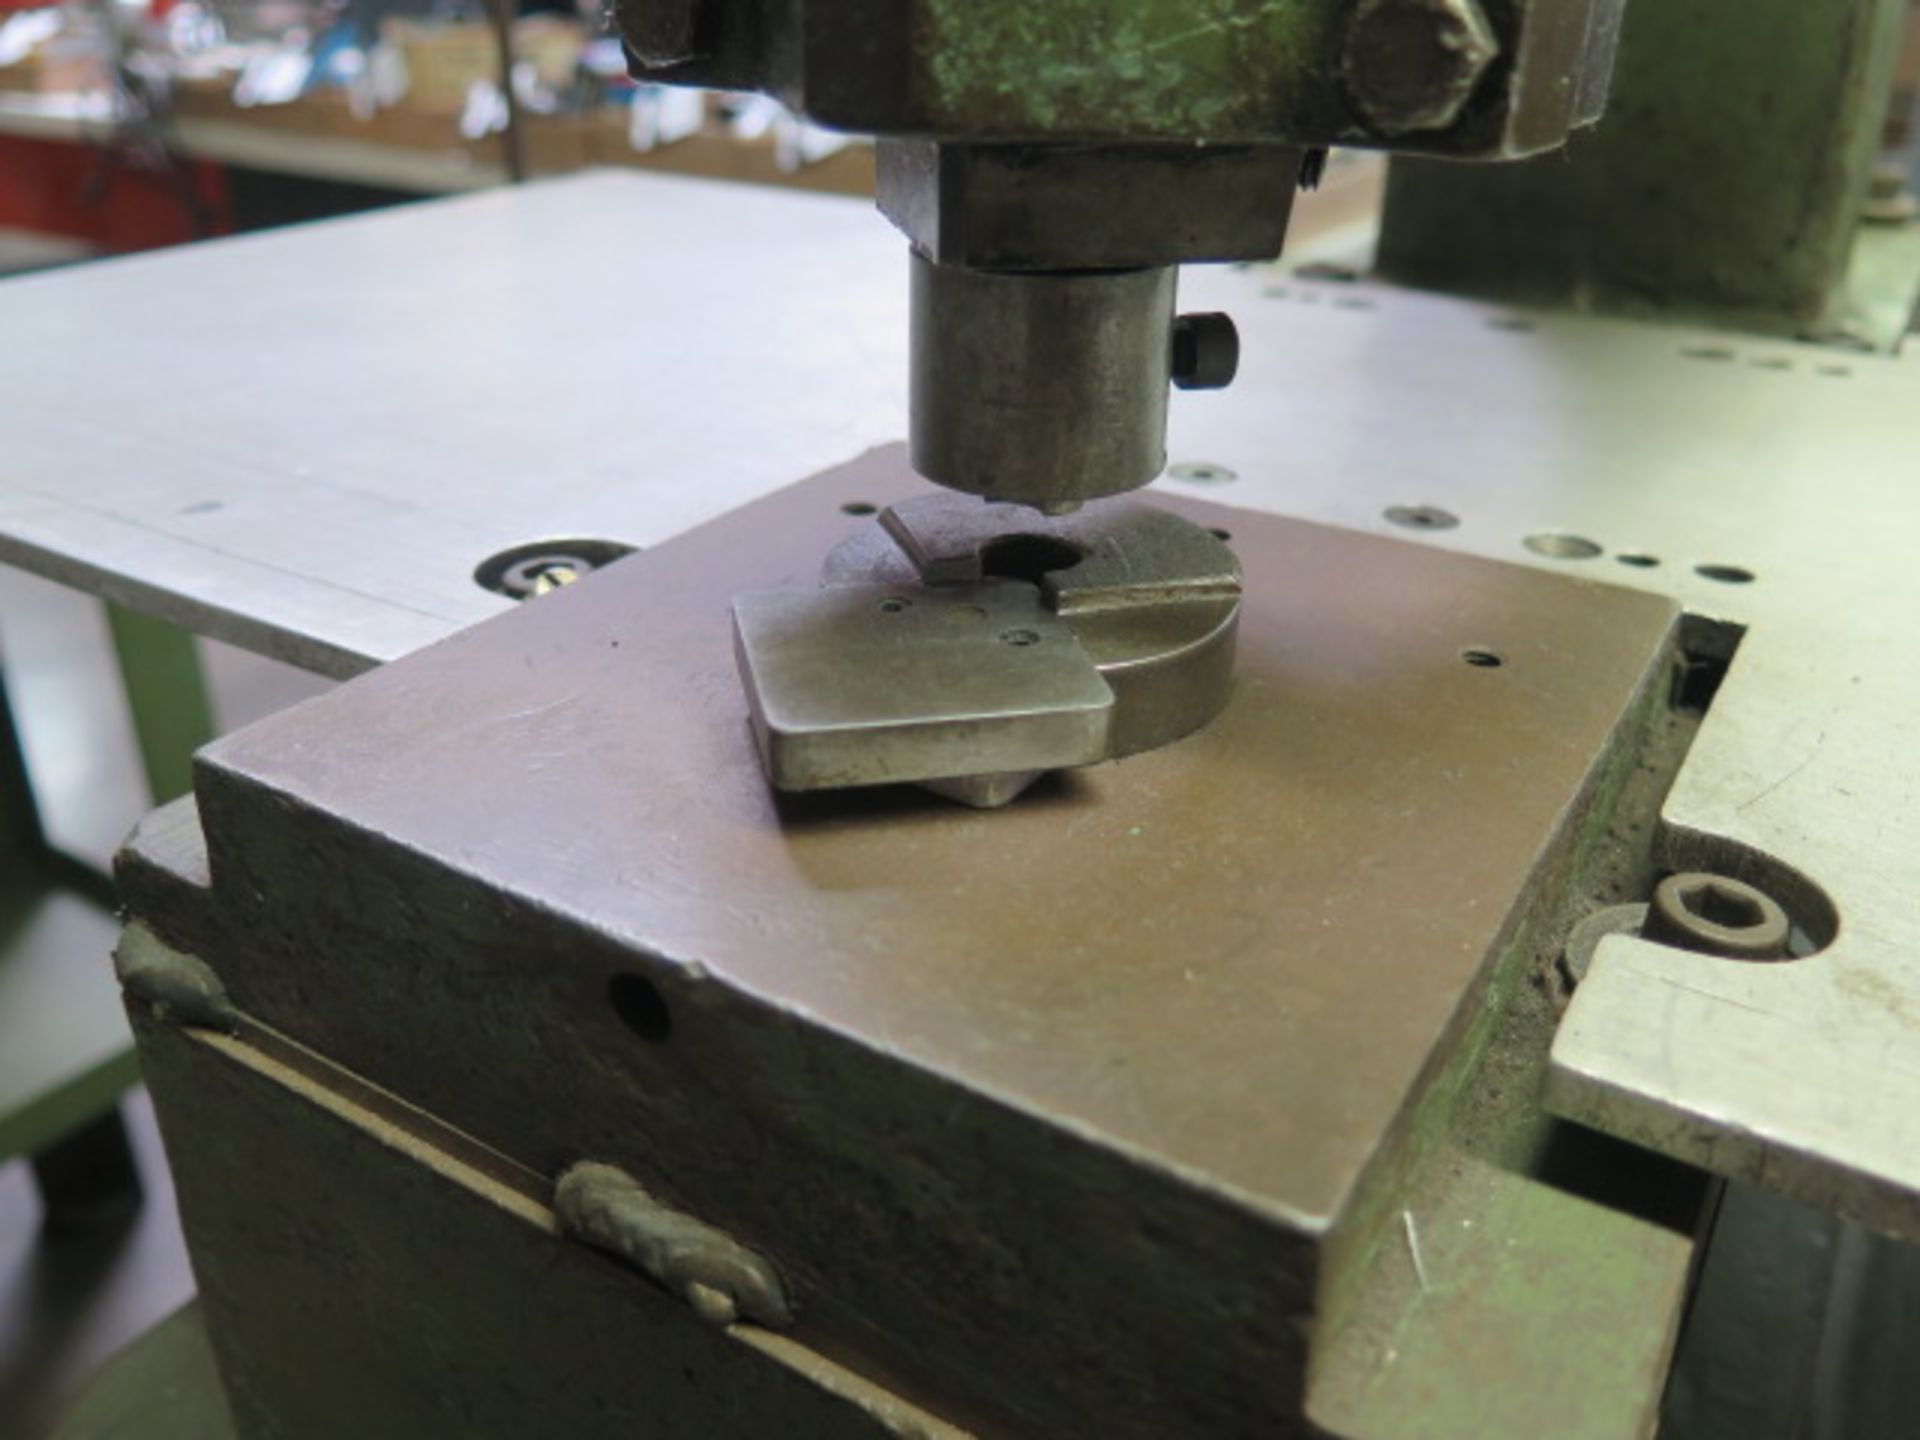 DiAcro “Punch No. 2” 12” Hand Punch s/n BB-2604 w/ Corner Notching Die (SOLD AS-IS - NO WARRANTY) - Image 5 of 7